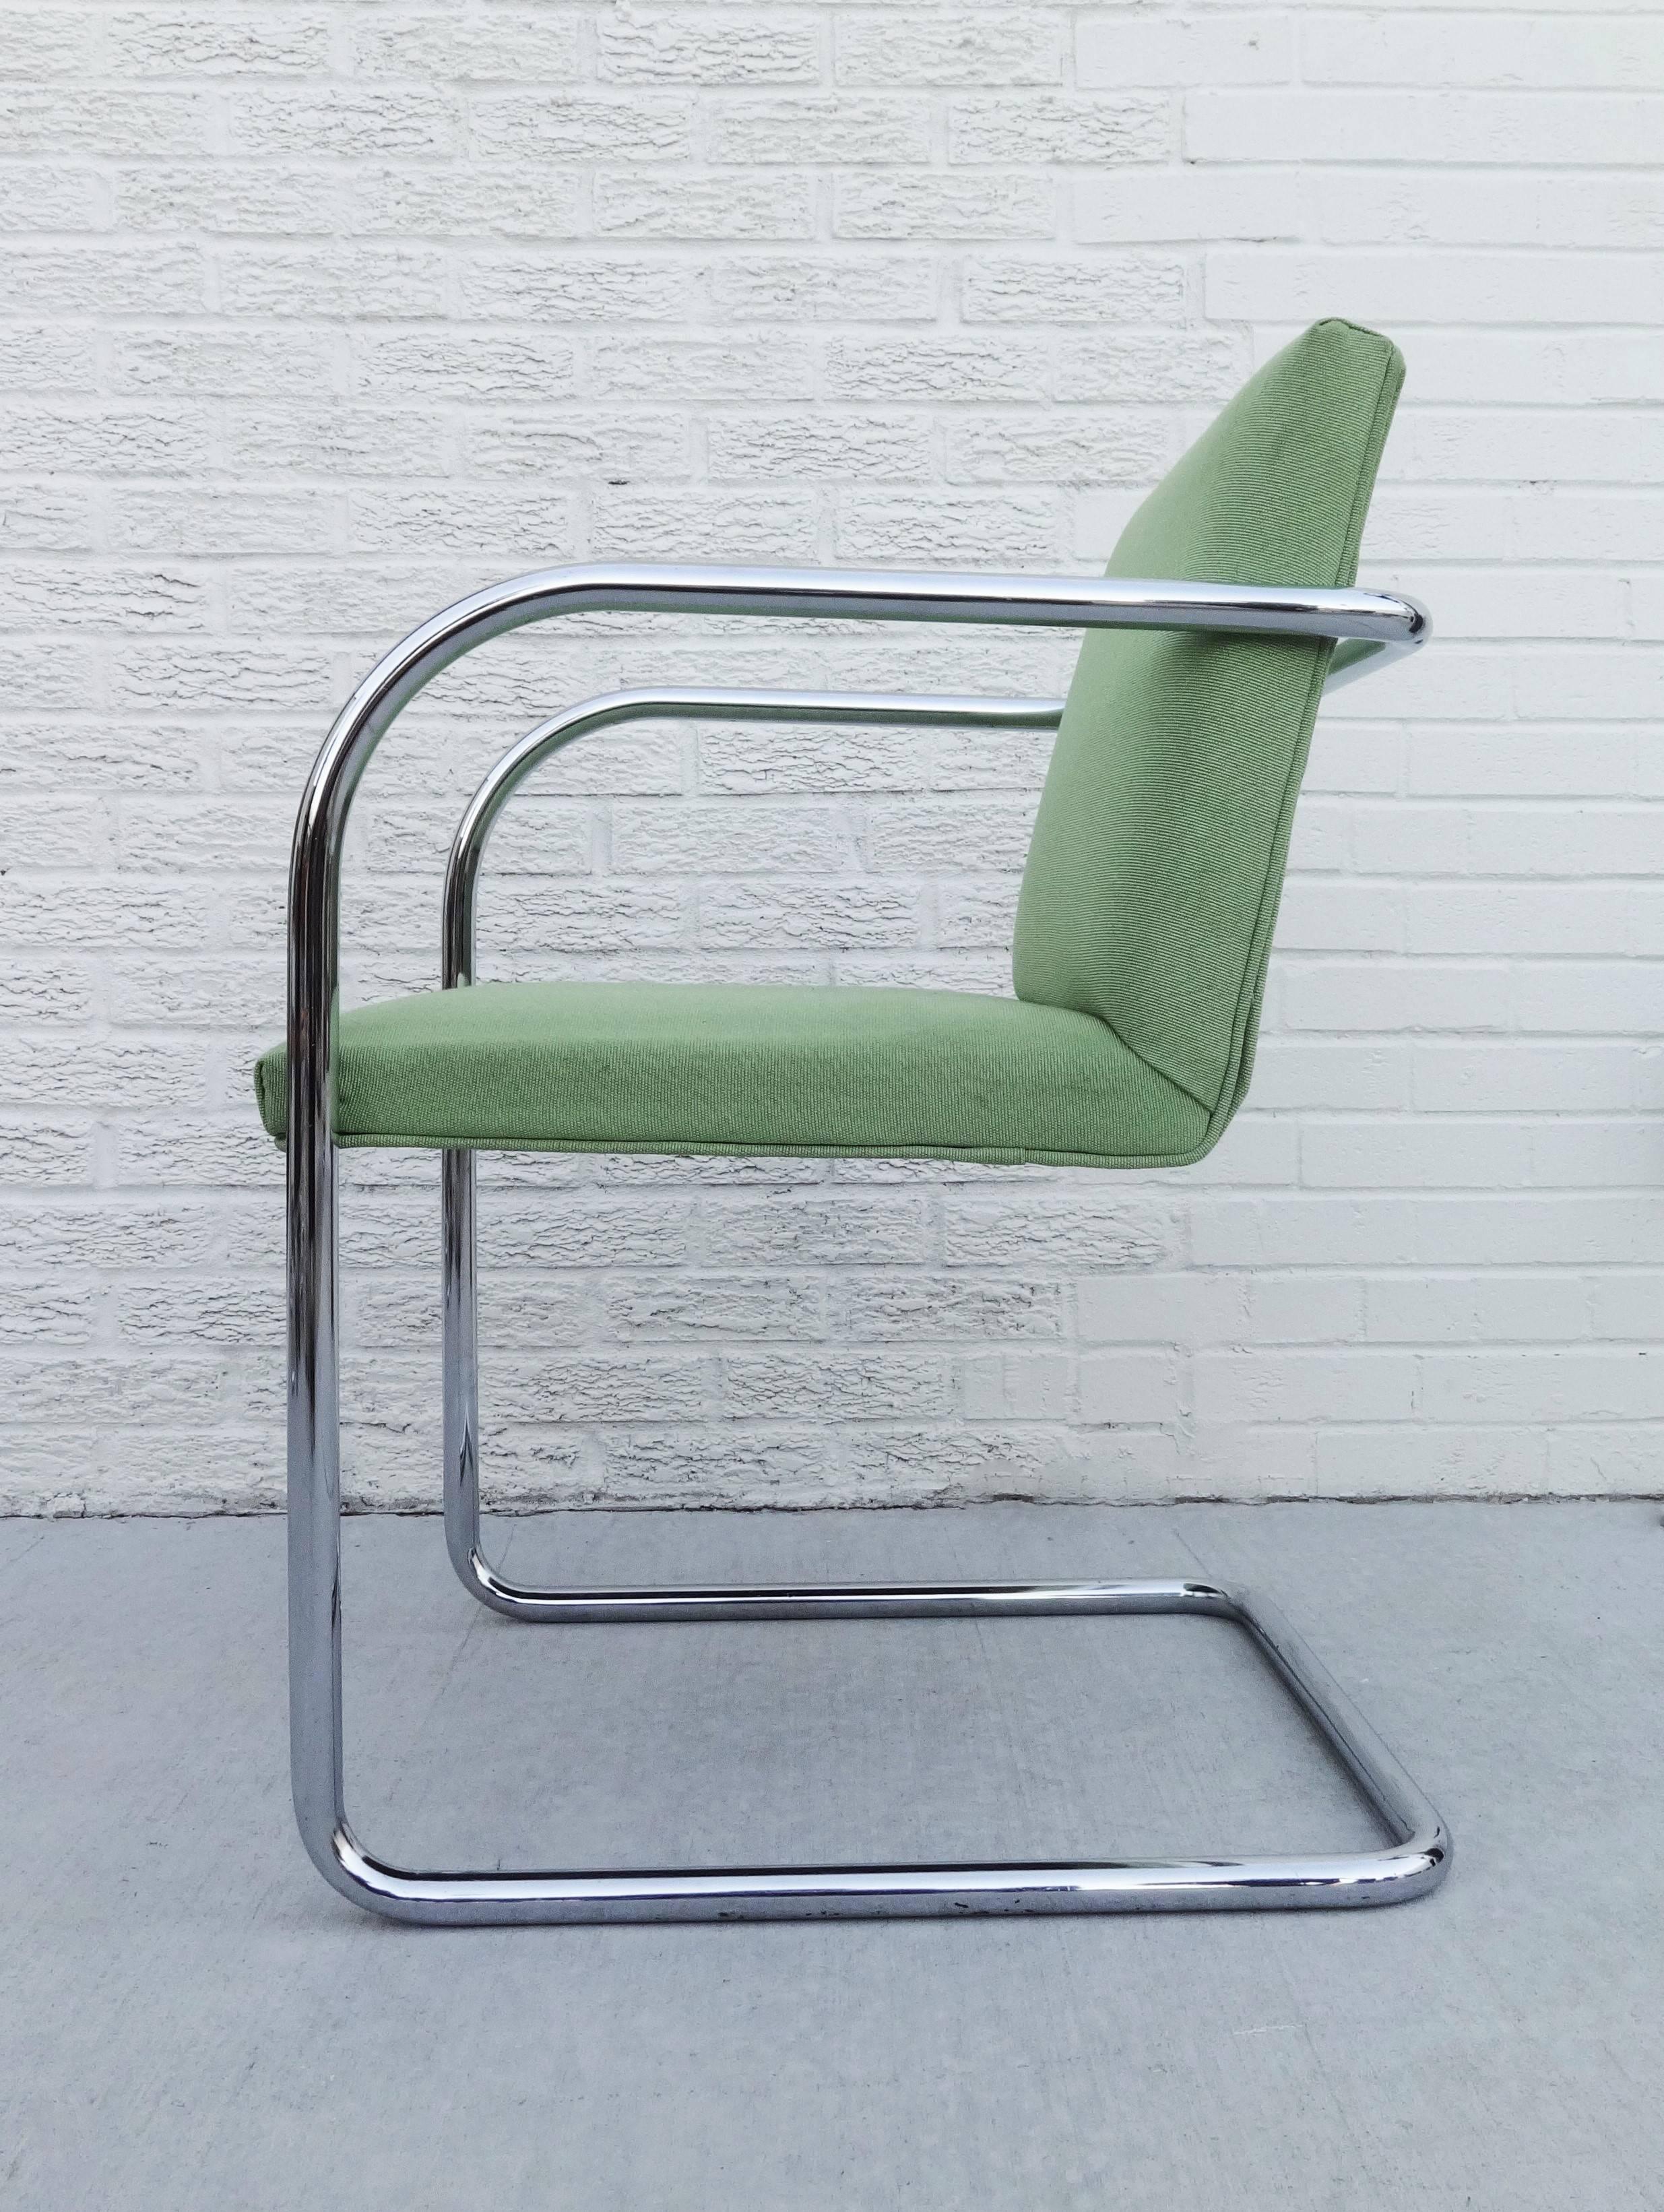 A set of six 'Brno' model dining armchairs designed by German architect Ludwig Mies van der Rohe for Knoll, circa 1980s. These chairs came out from the executive offices of Neiman Marcus, Downtown Dallas Tx.

Featuring four chair seats and backs